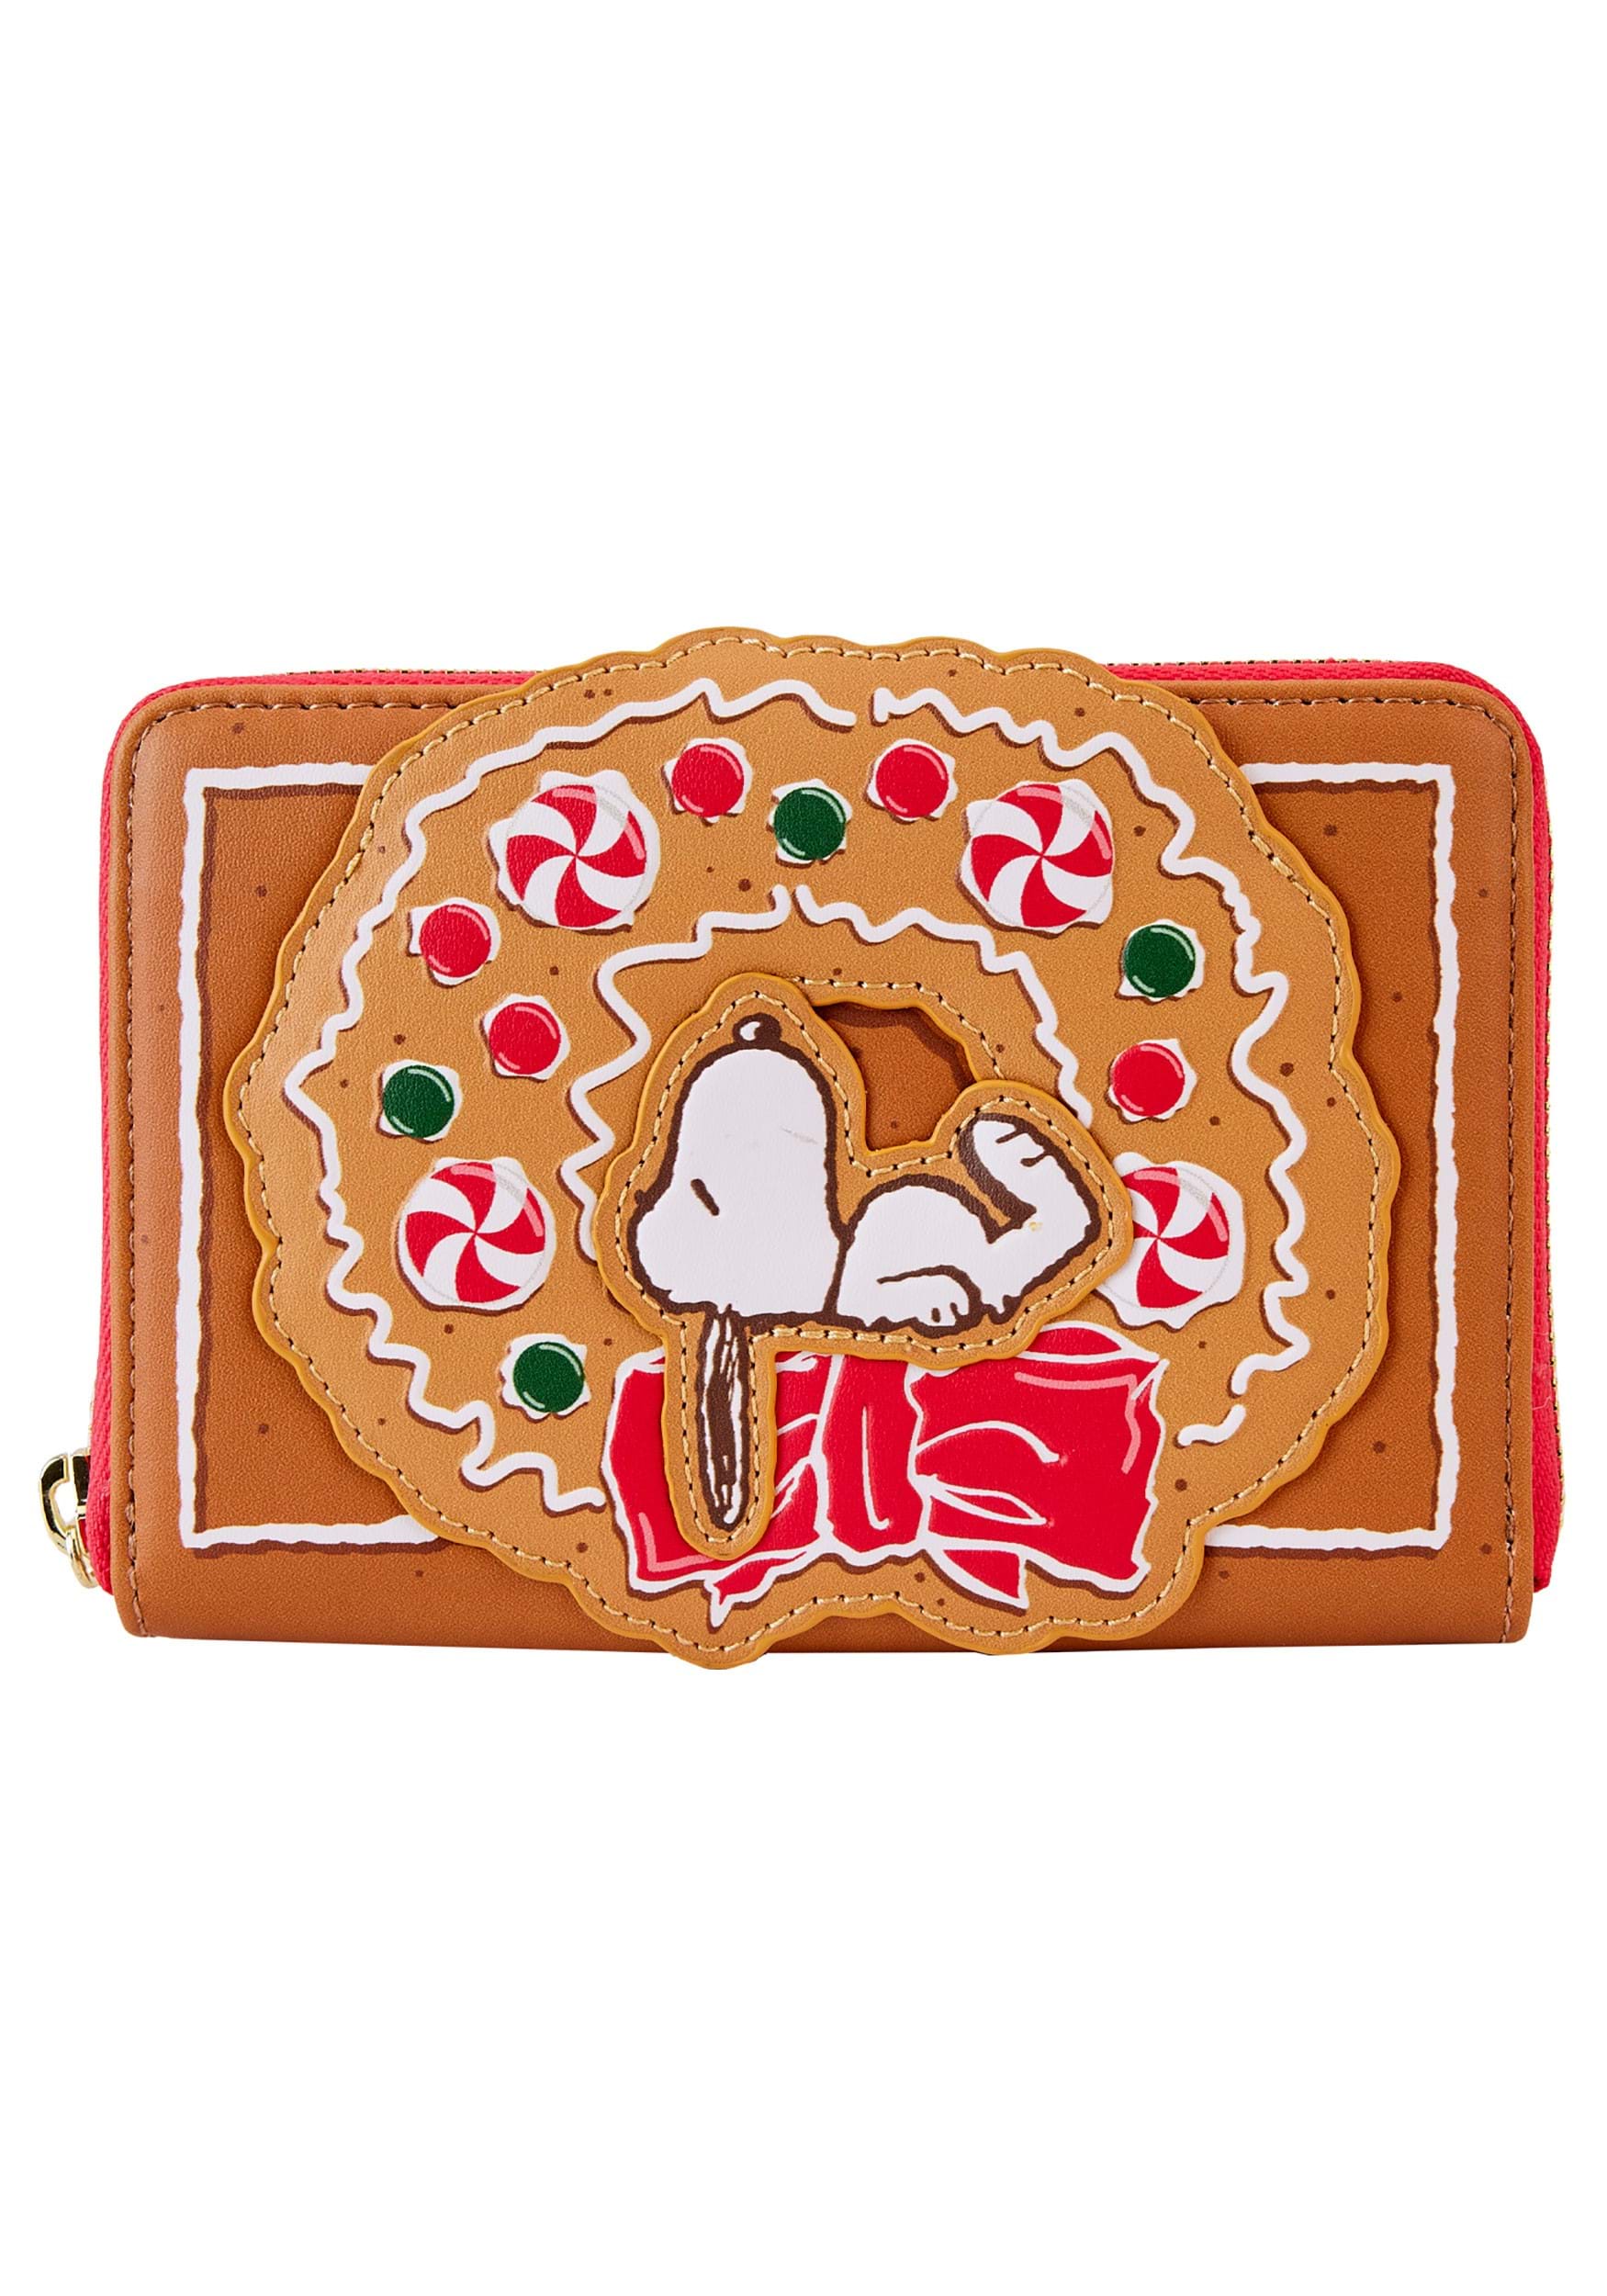 https://images.fun.com/products/94199/1-1/loungefly-peanuts-snoopy-gingerbread-wreath-zip-wallet.jpg